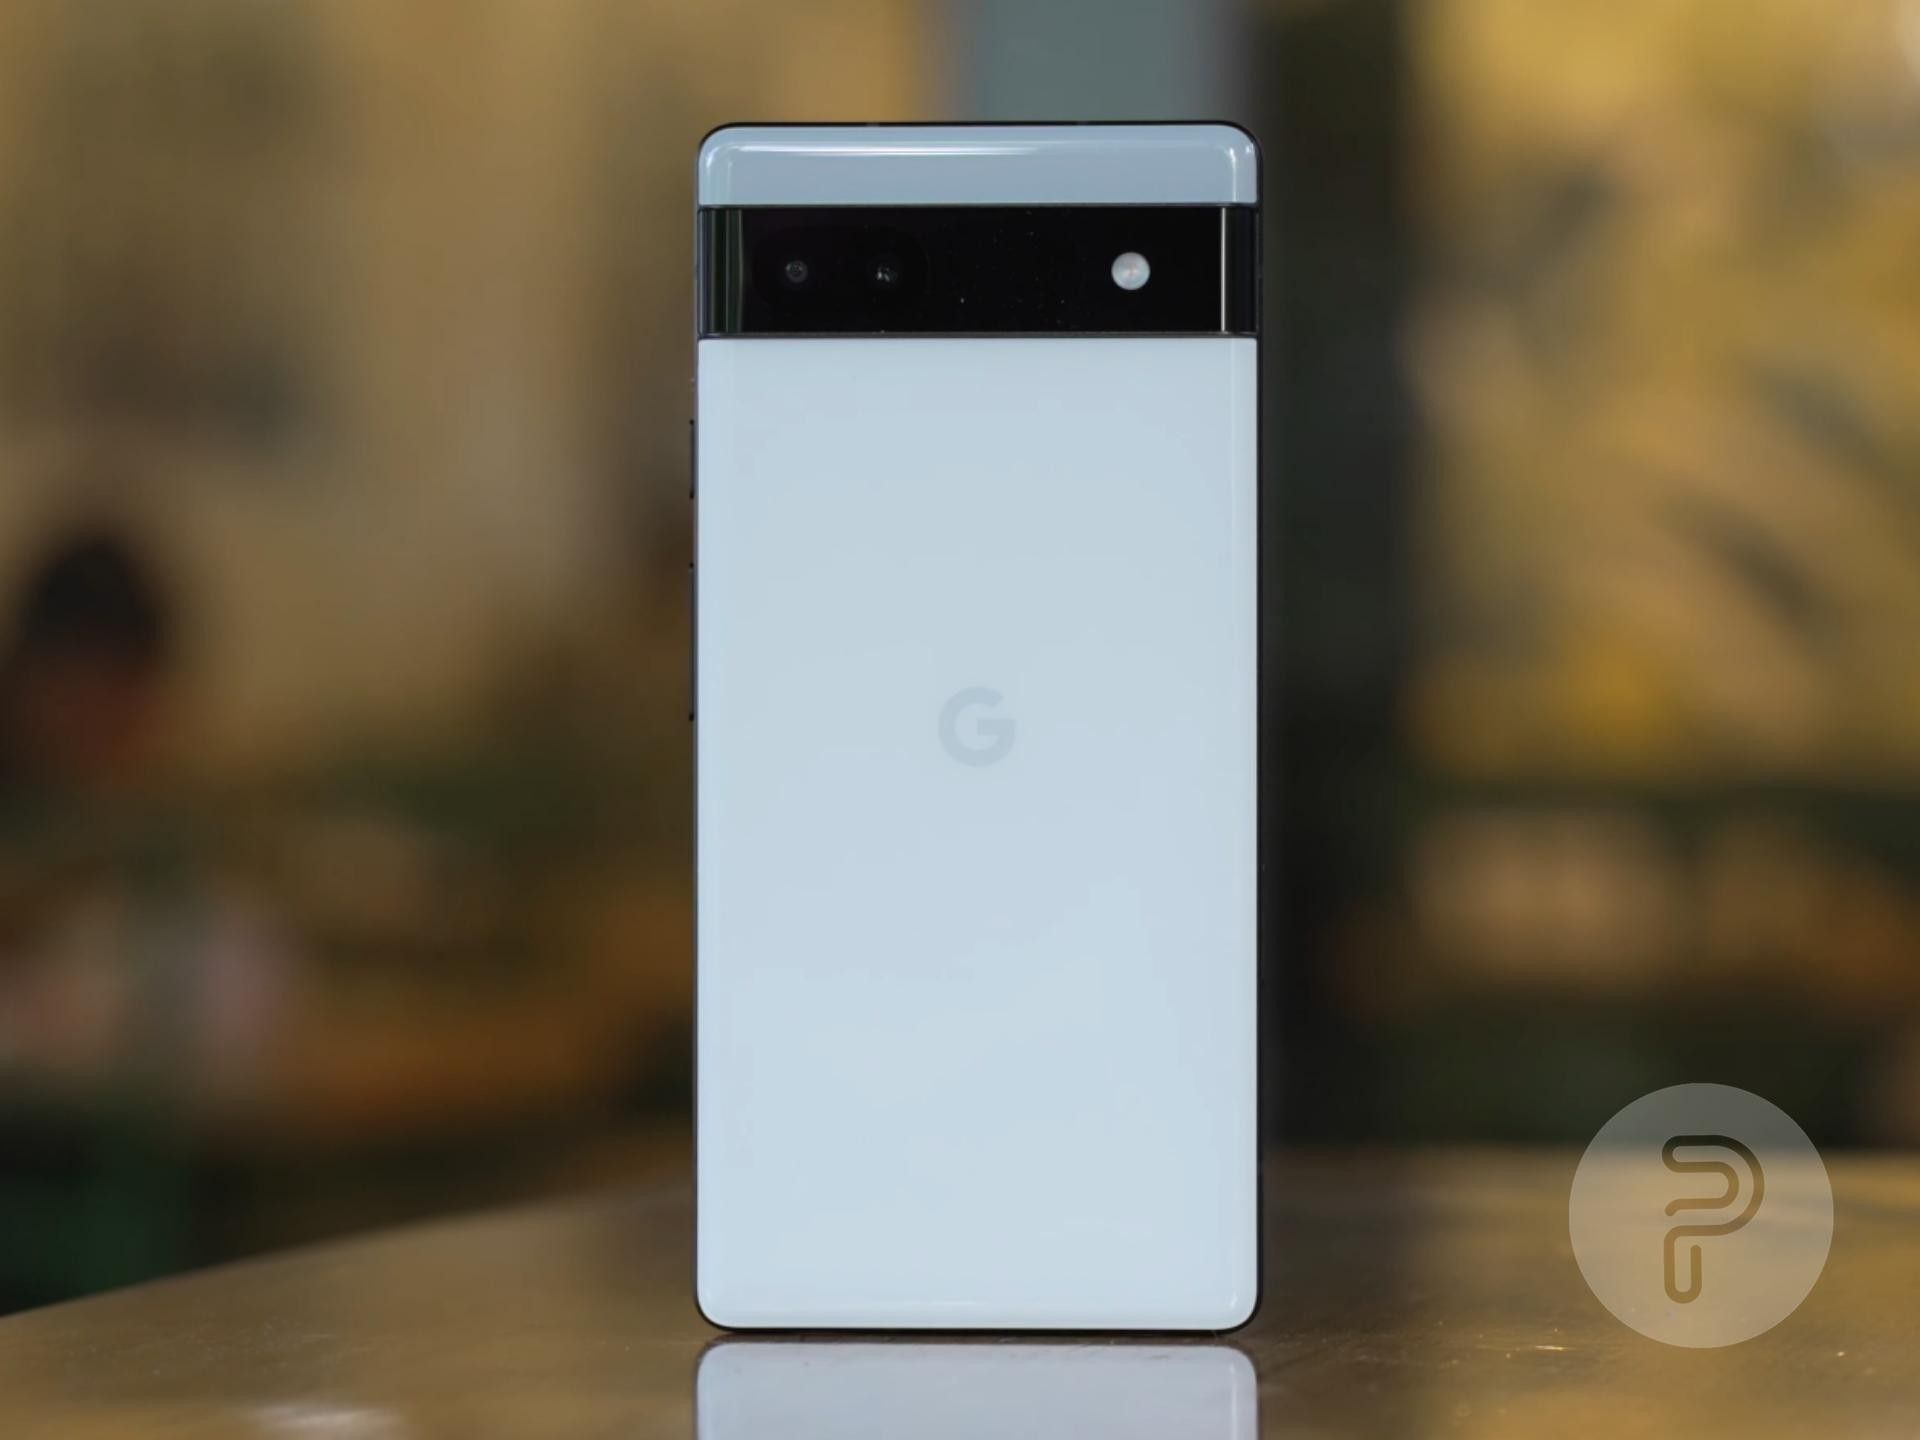 Google Pixel 6a is available for just $249 with activation today!